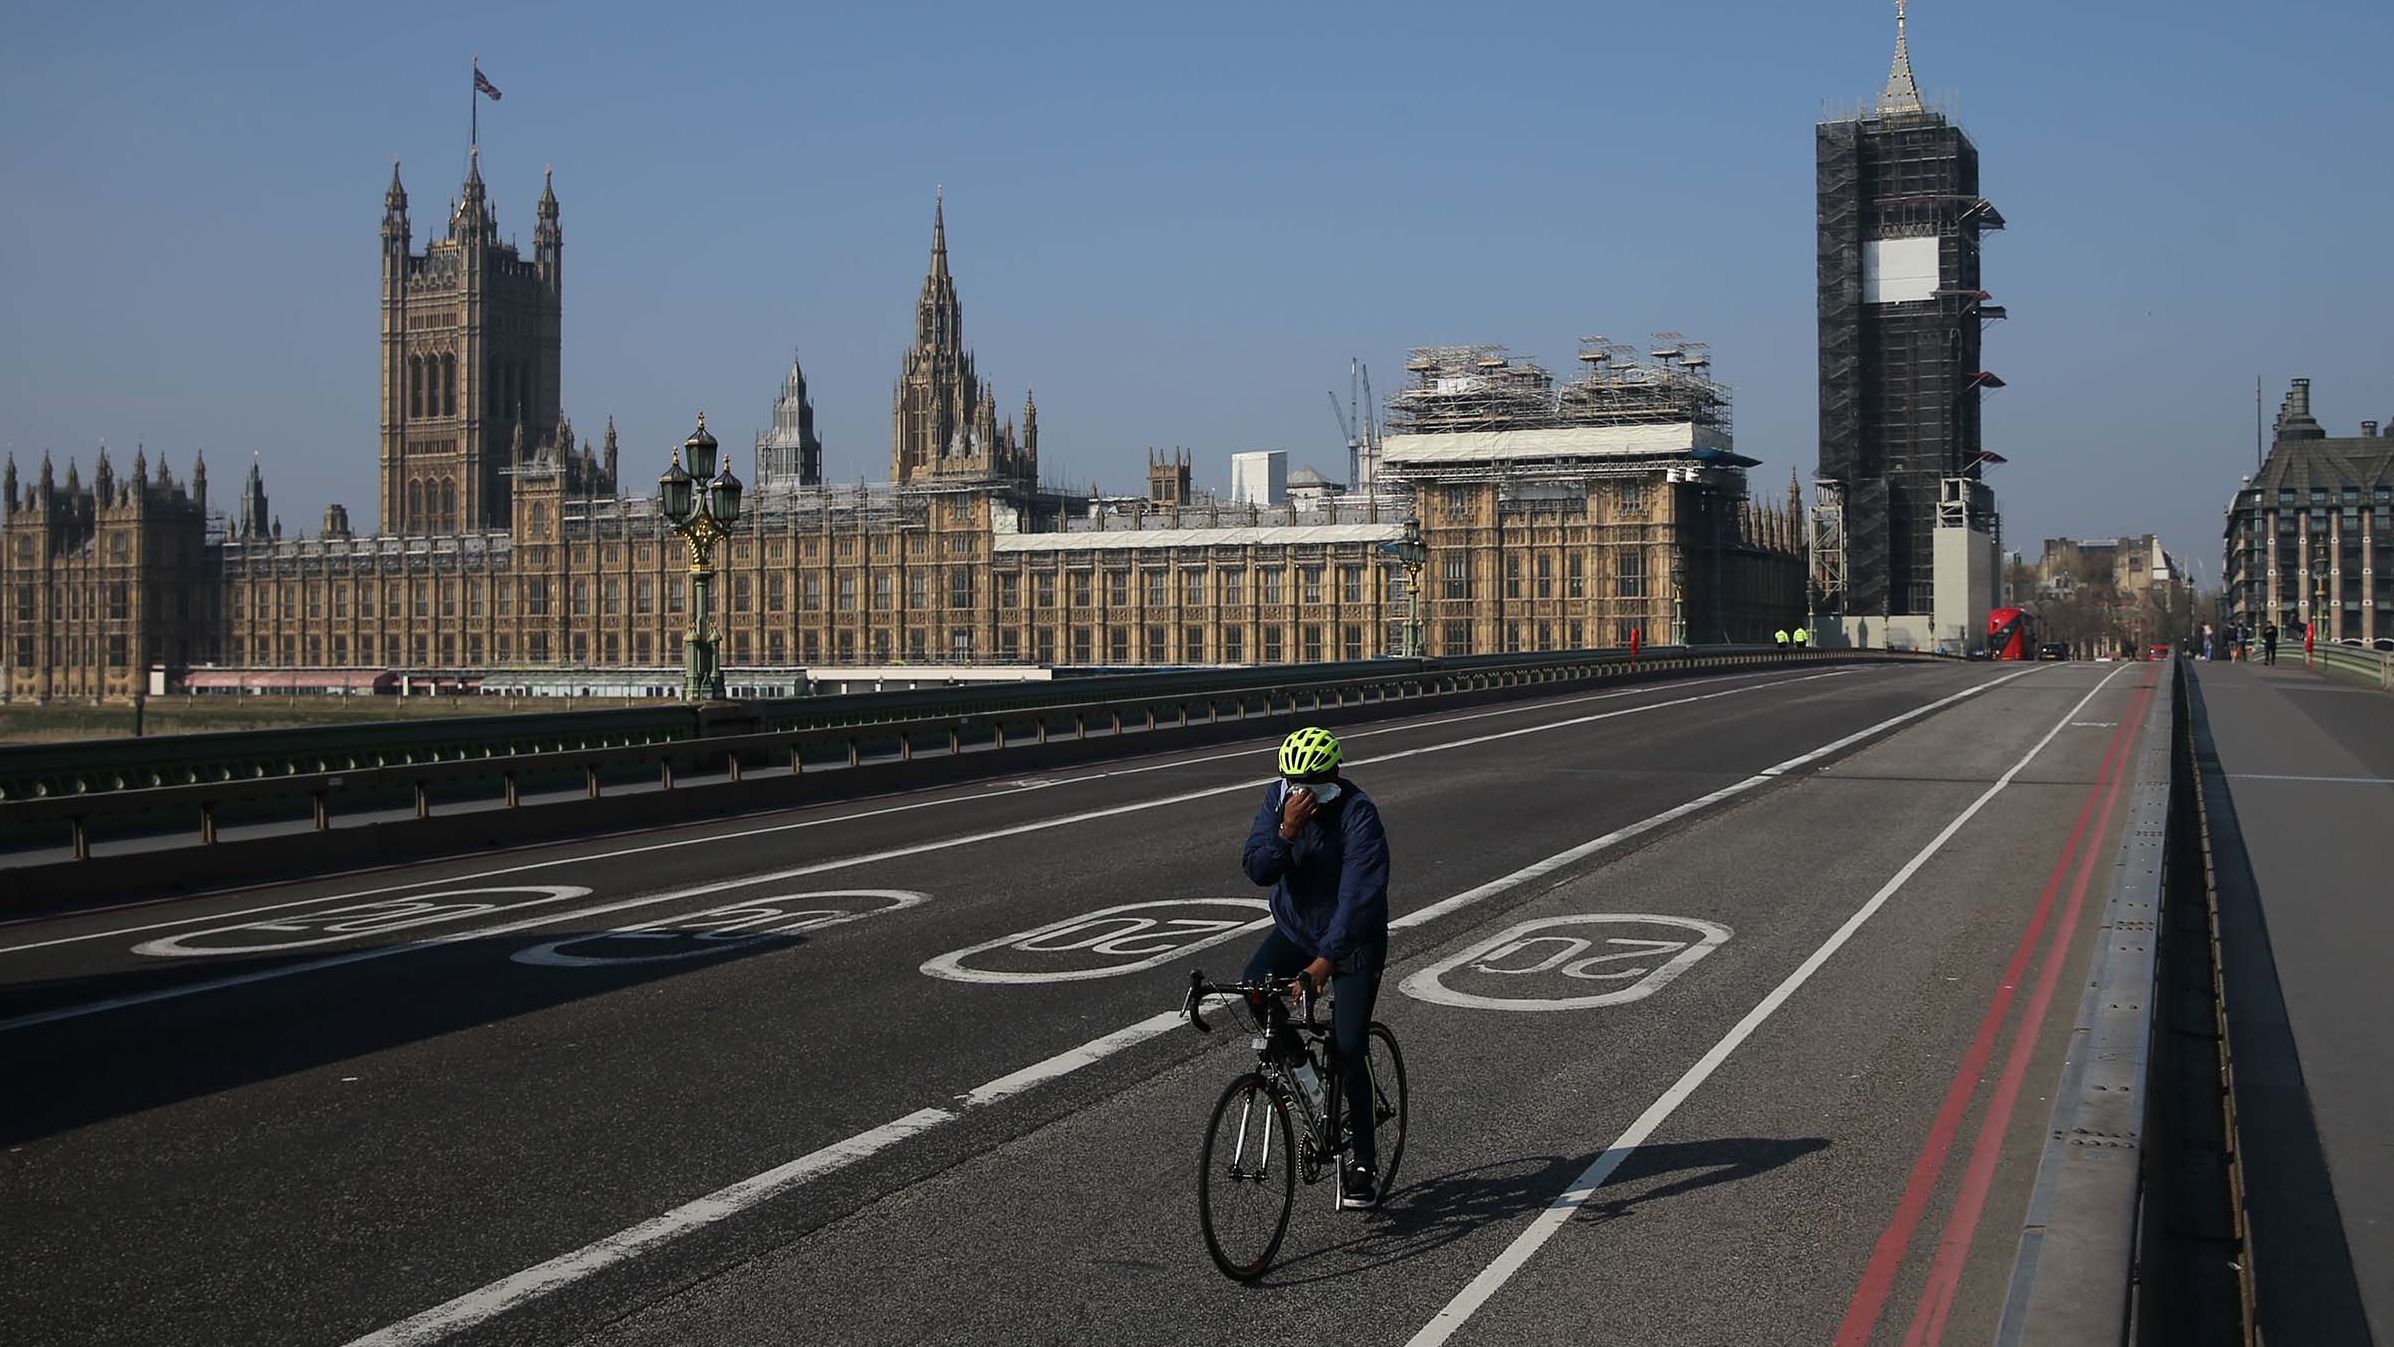 A cyclist crosses a near-empty Westminster Bridge with the Houses of Parliament in the background in central London on April 9, 2020. - British Prime Minister Boris Johnson on Thursday began a fourth day in intensive care "improving" in his battle with coronavirus, as his government prepared to extend a nationwide lockdown introduced last month. (Photo by ISABEL INFANTES/AFP via Getty Images)